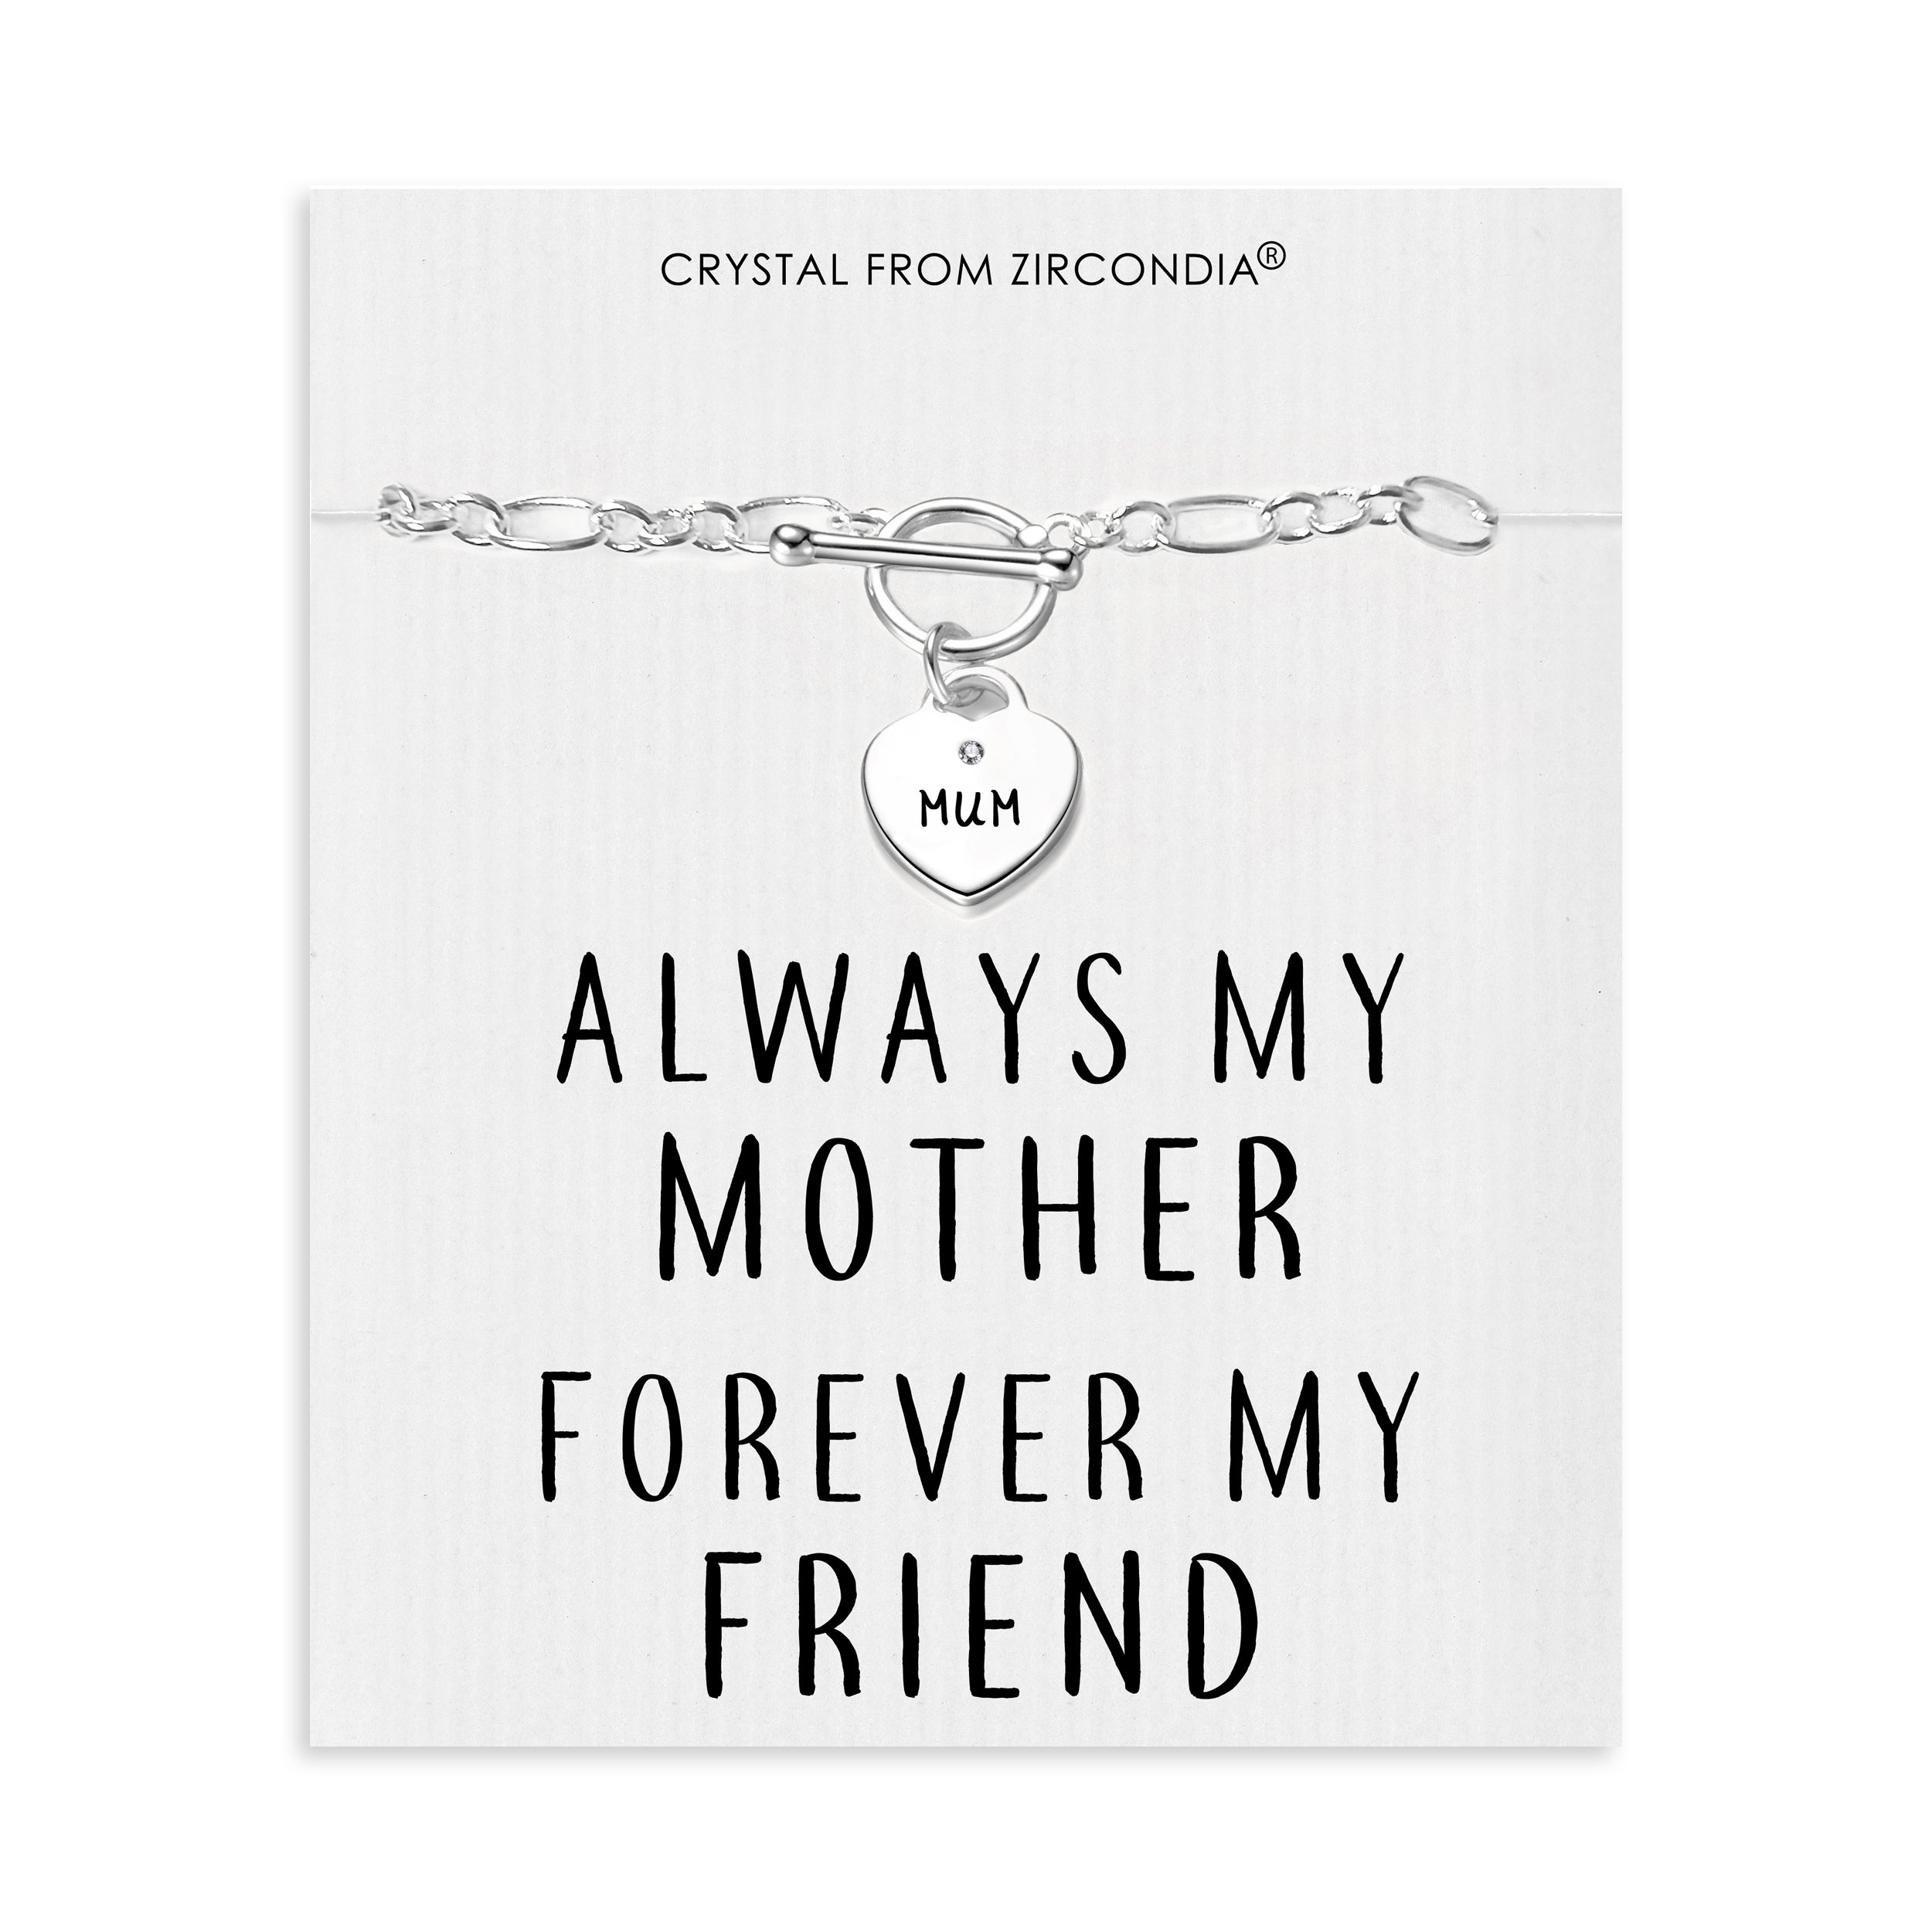 Mum Charm Bracelet with Quote Card Created with Zircondia® Crystals by Philip Jones Jewellery